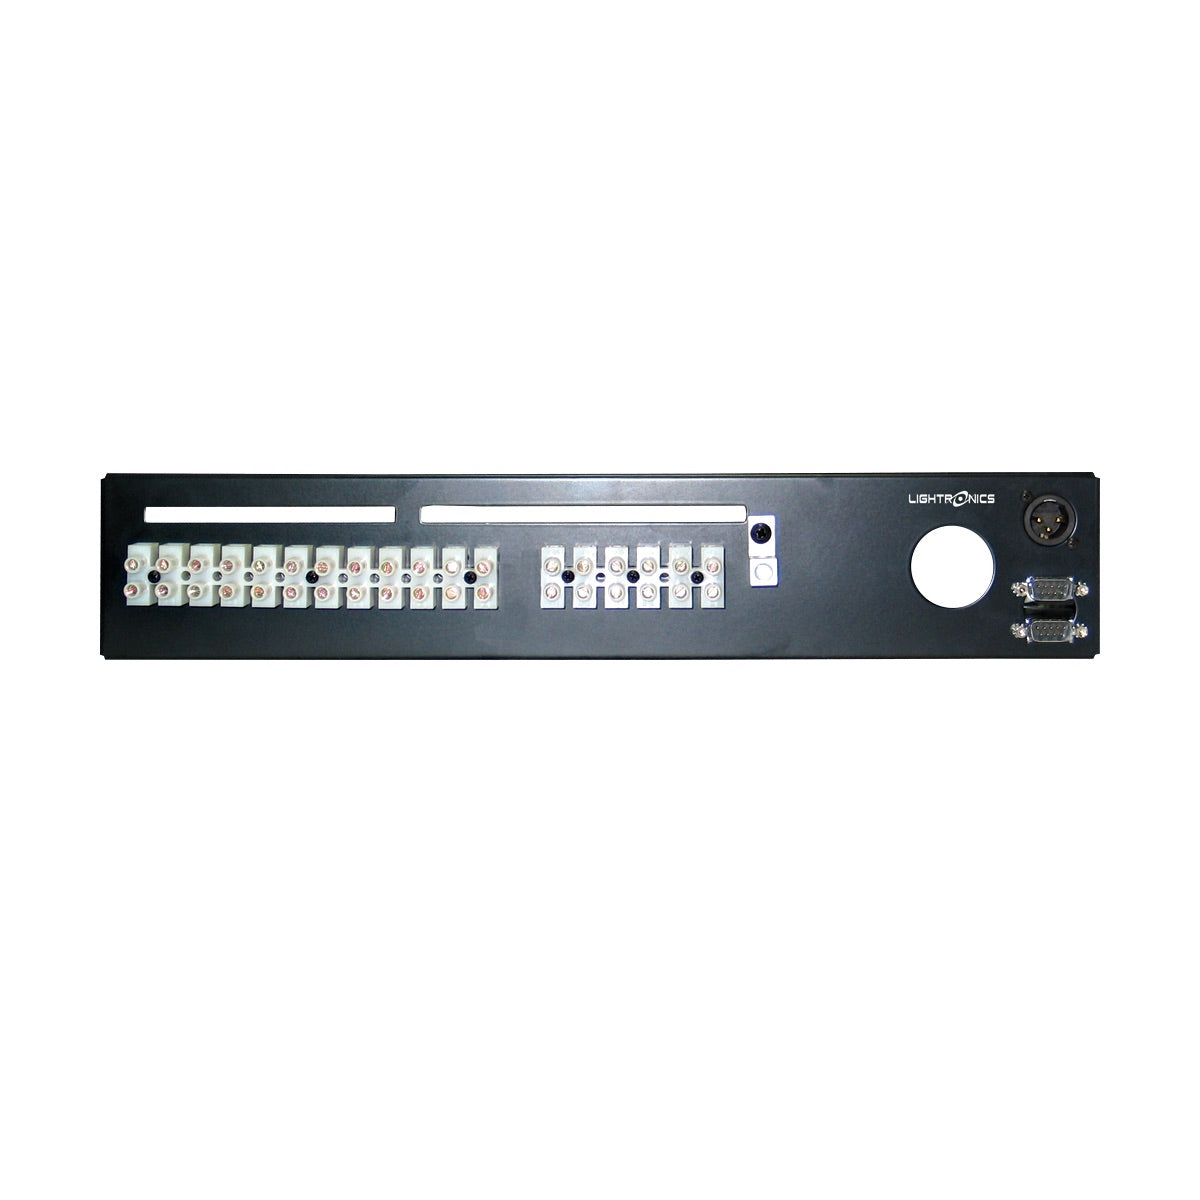 Lightronics RD121 Rack Mount Dimmer, RD Series, rear Terminal/Barrier Connector Strip with Knockout Cover